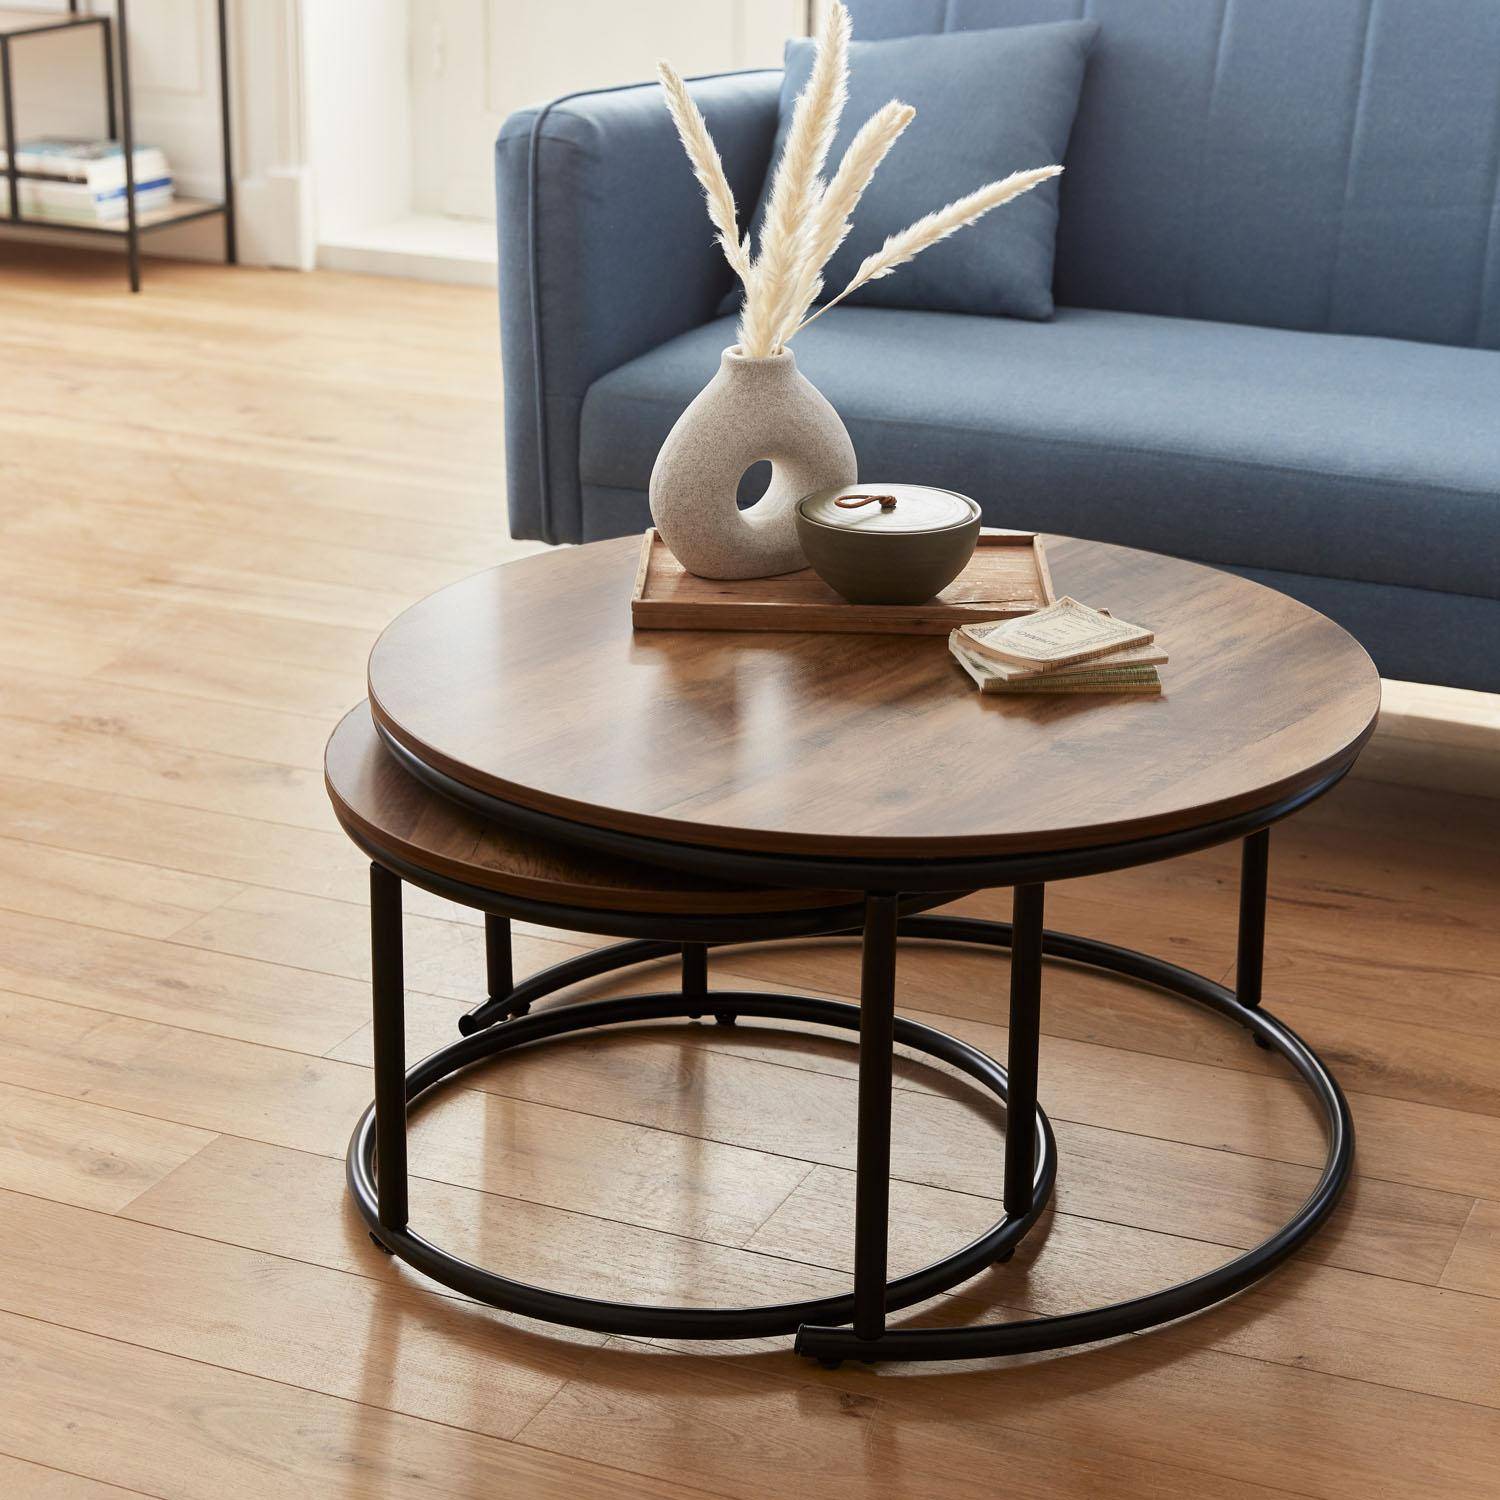 Pair of round, metal and wood-effect nesting coffee tables, 77x40x57cm - Loft,sweeek,Photo3